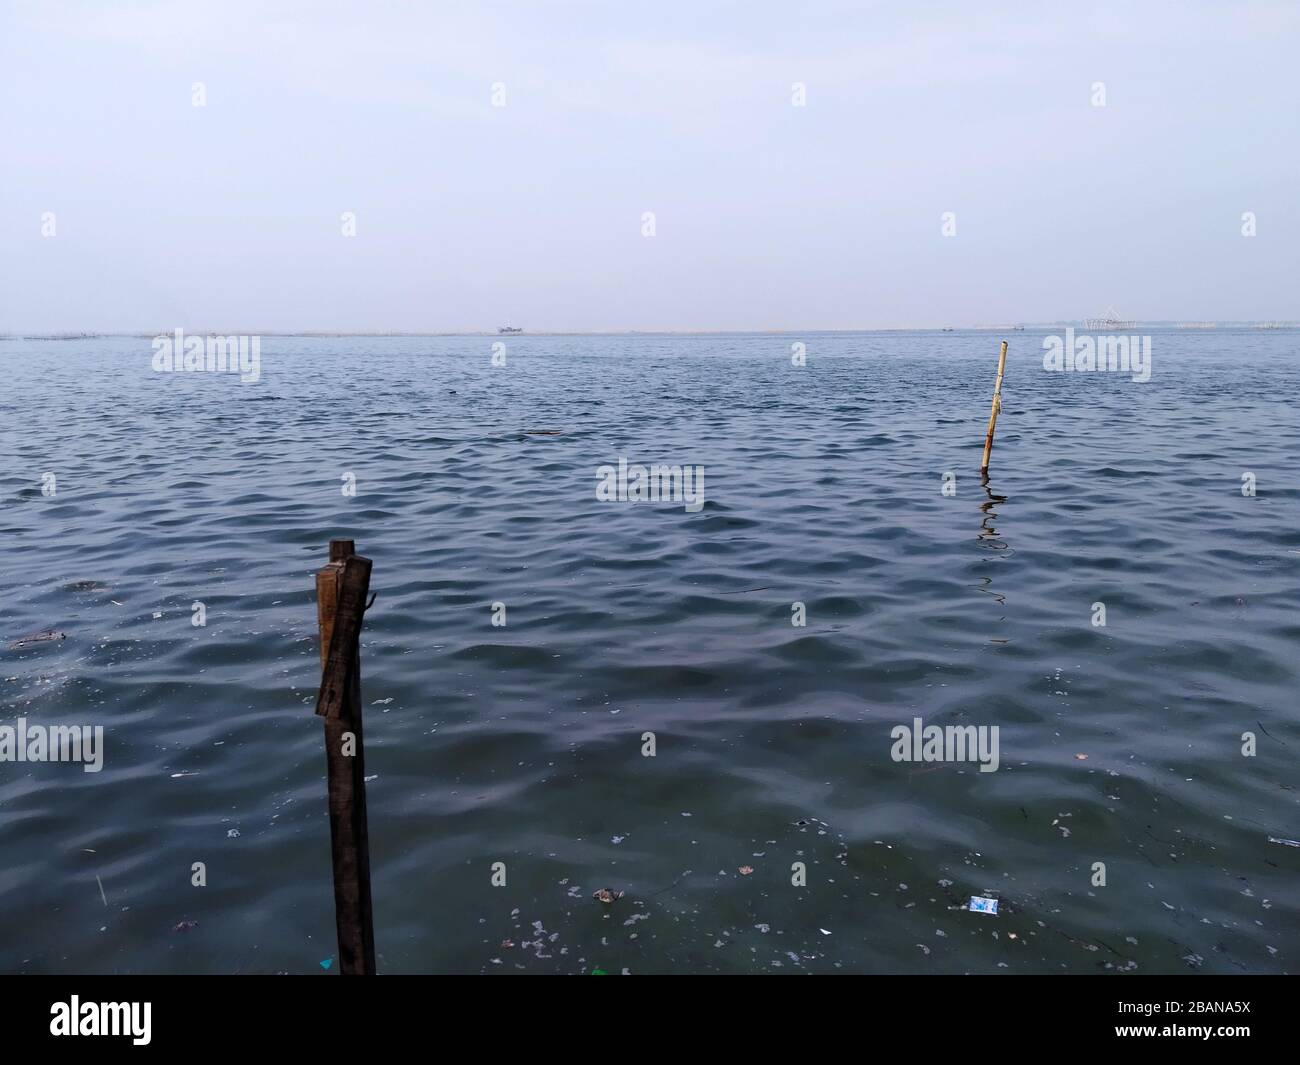 A view of sewage floating on the surface of the sea Stock Photo